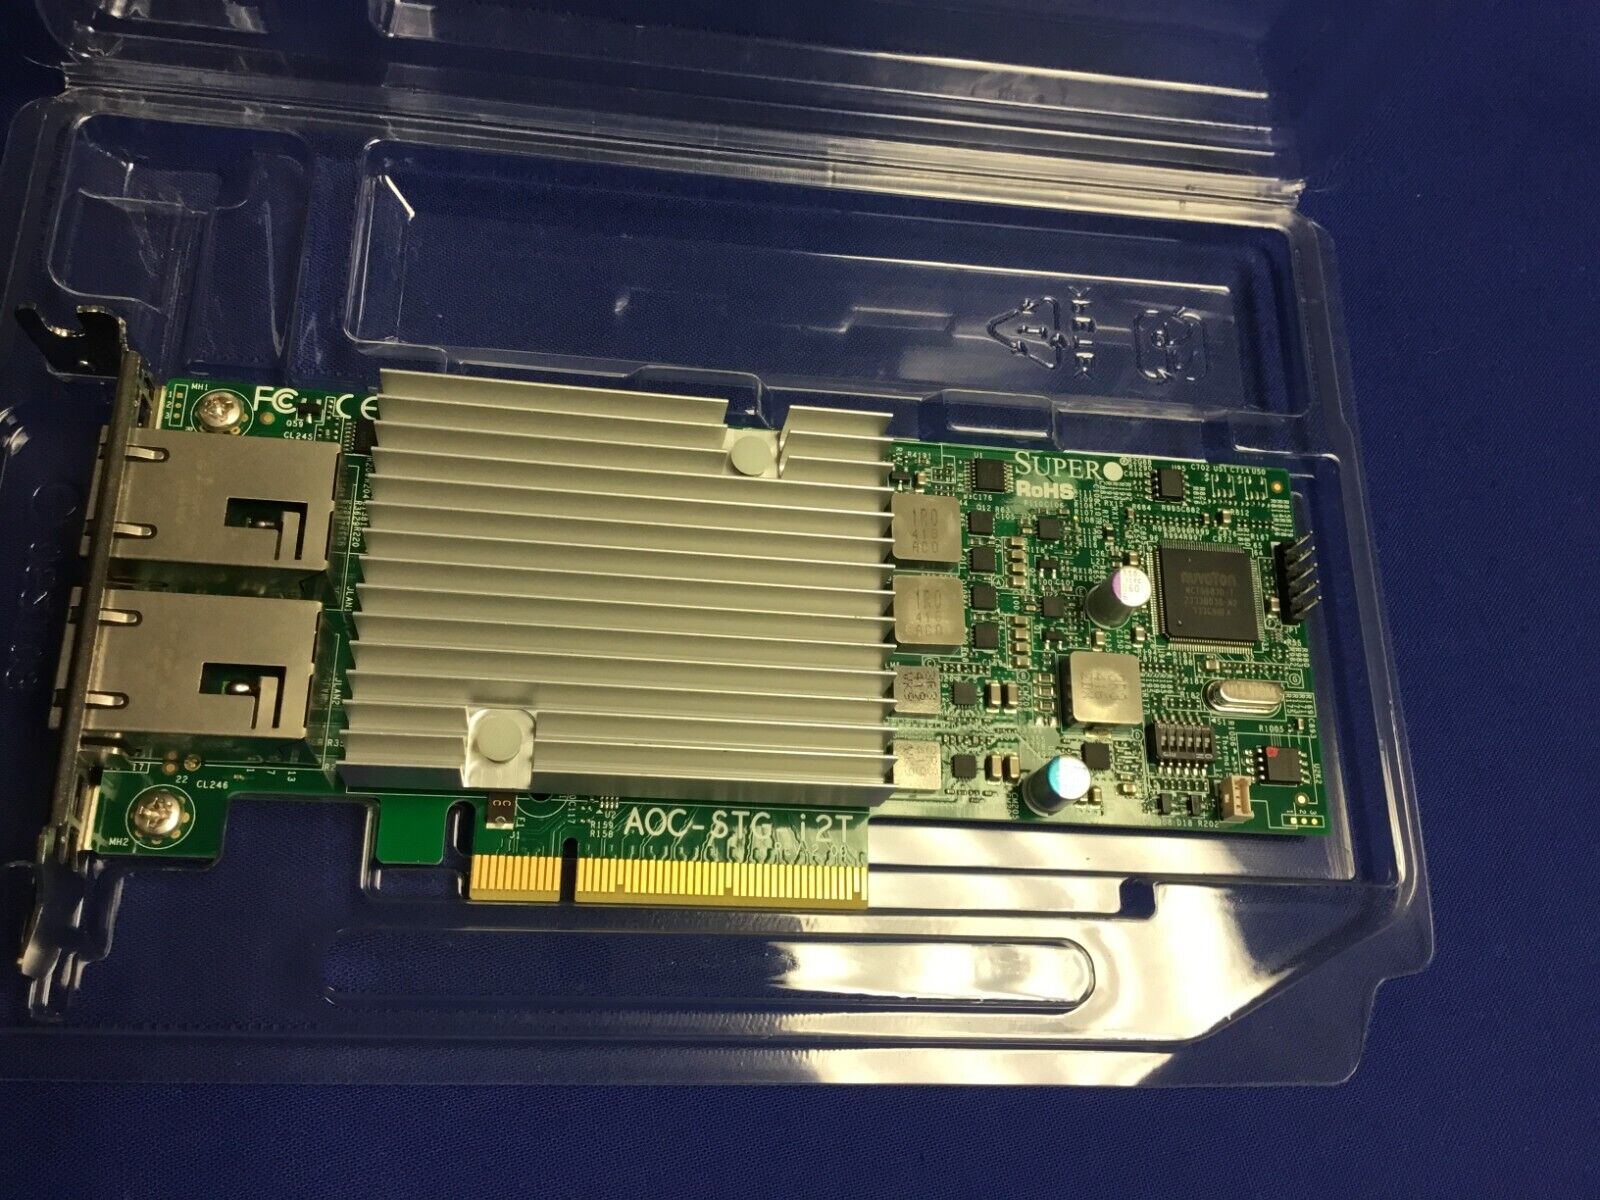 AOC-STG-I2T SuperMicro X540-AT2 2-port 10GbE RJ45 Standard Adapter Revision 2.0